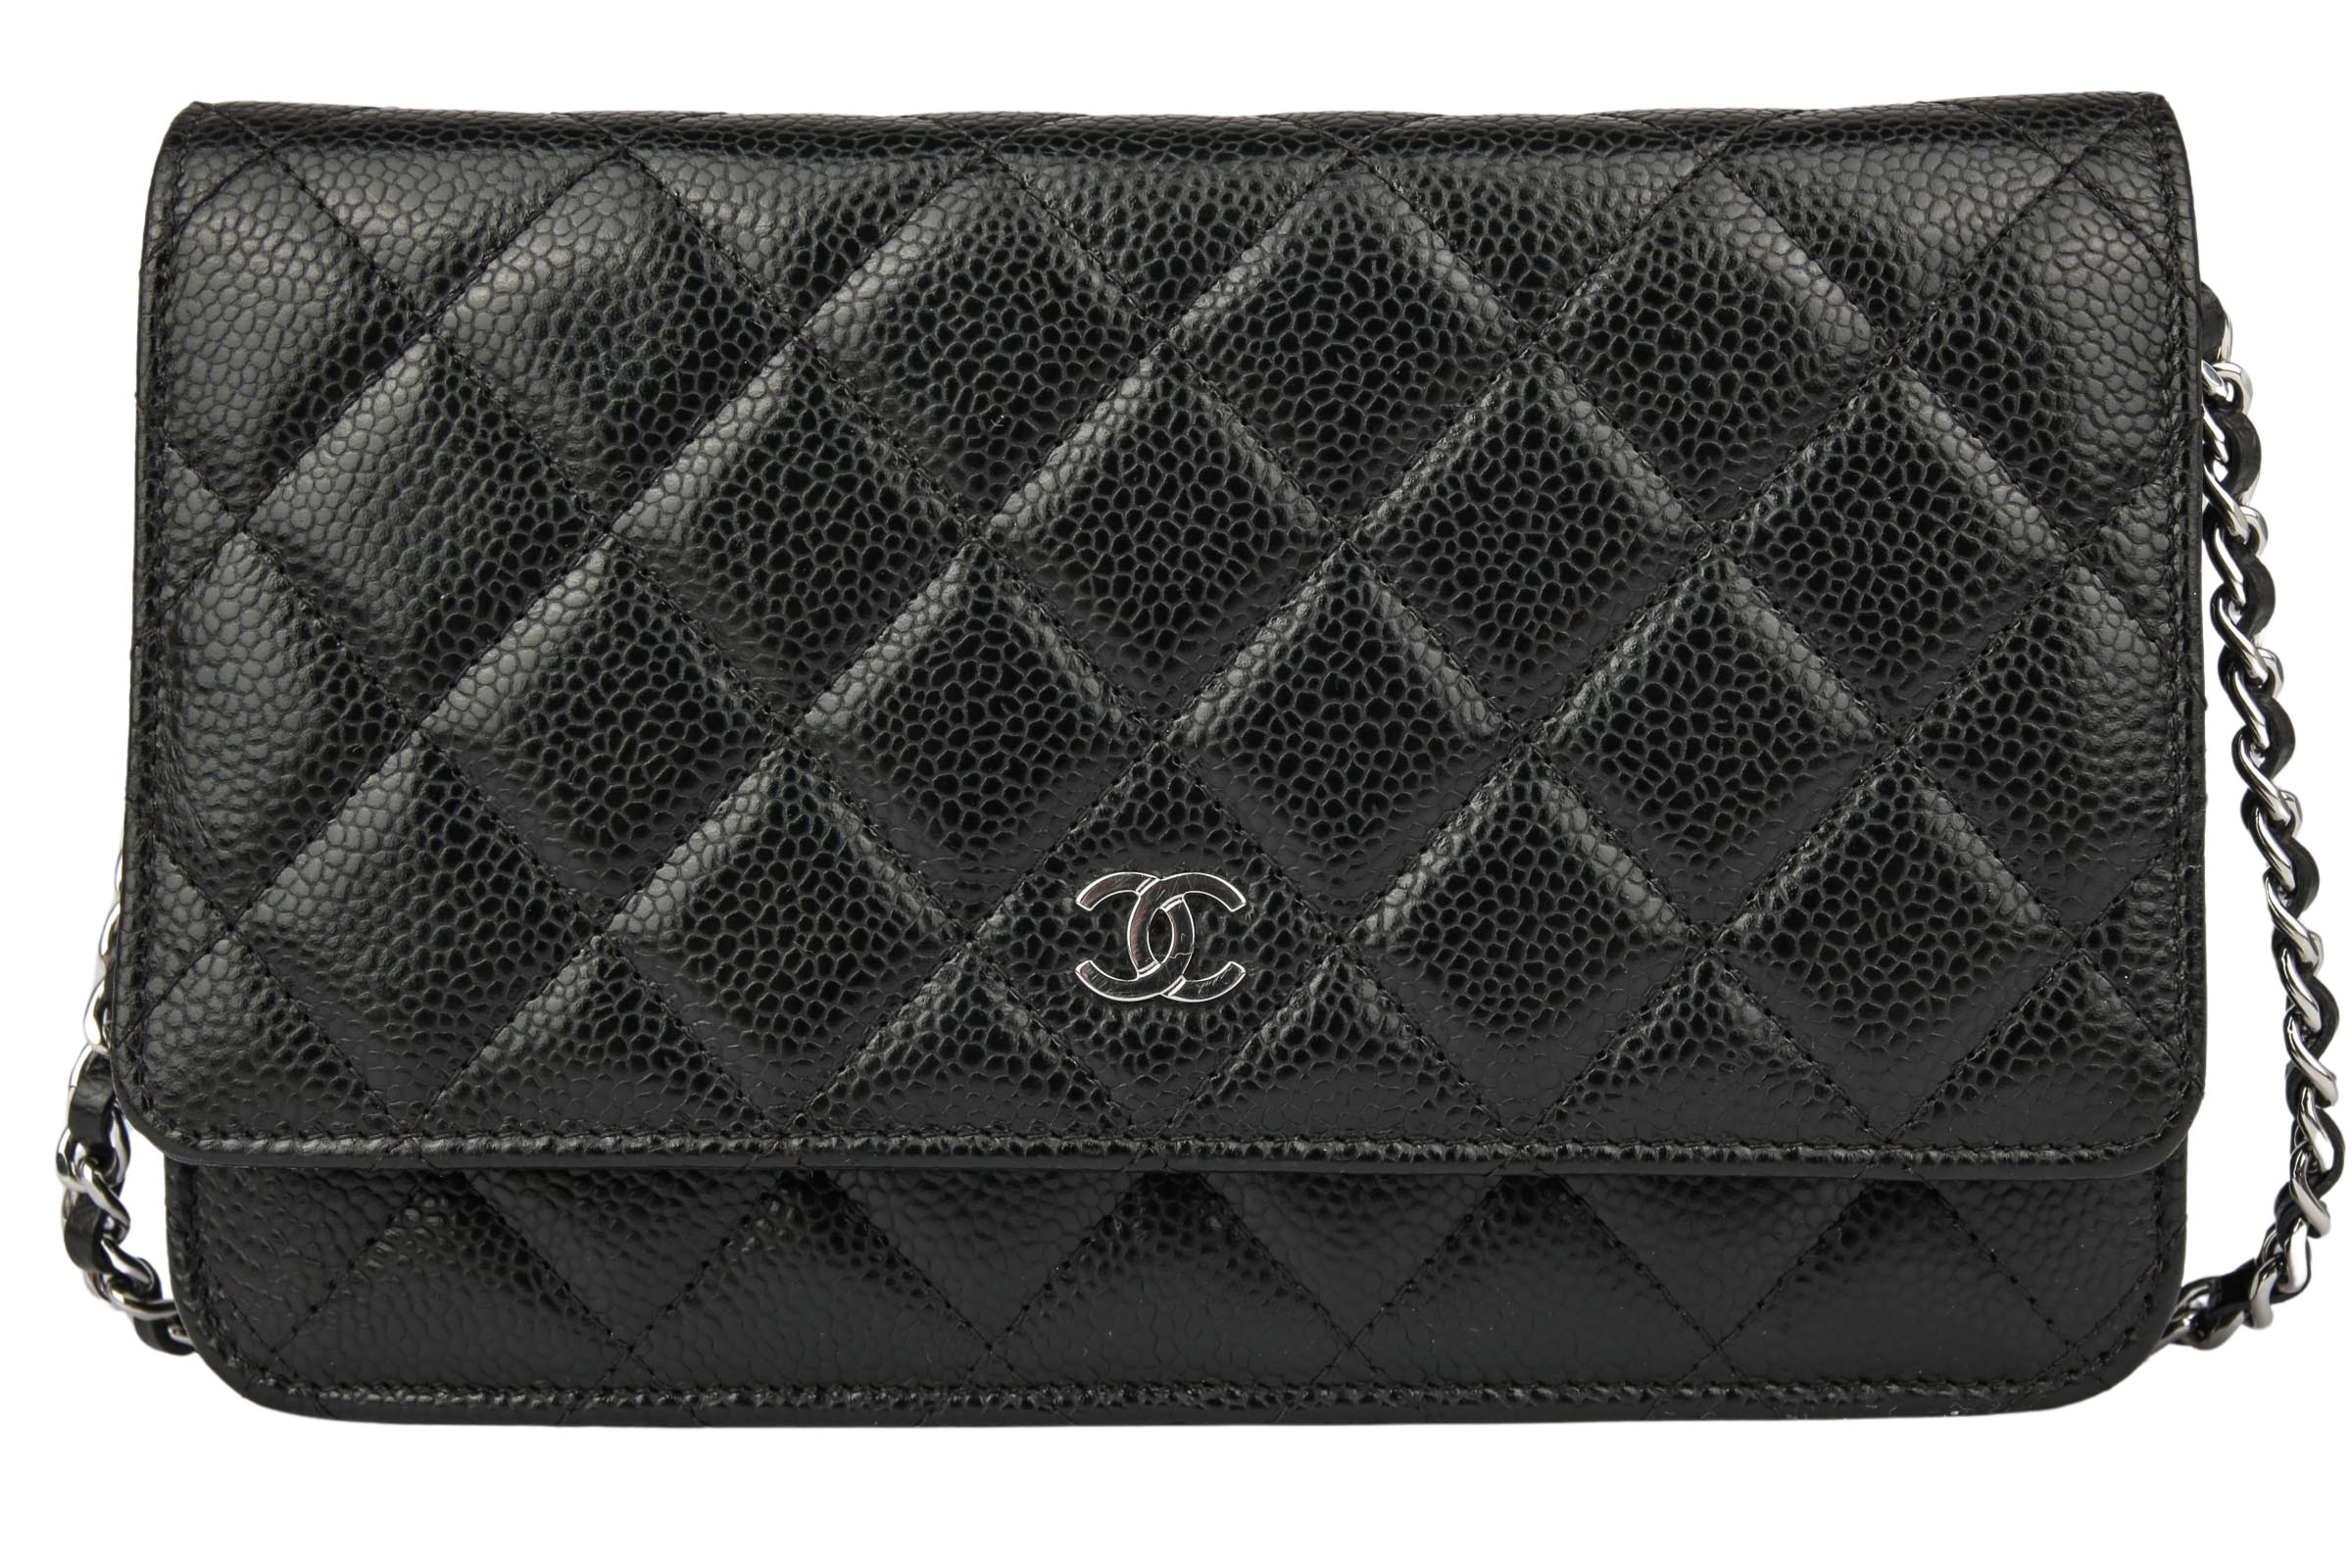 Chanel private collection & Luxury Accessories Online, Sale n°IT4151, Lot  n°42